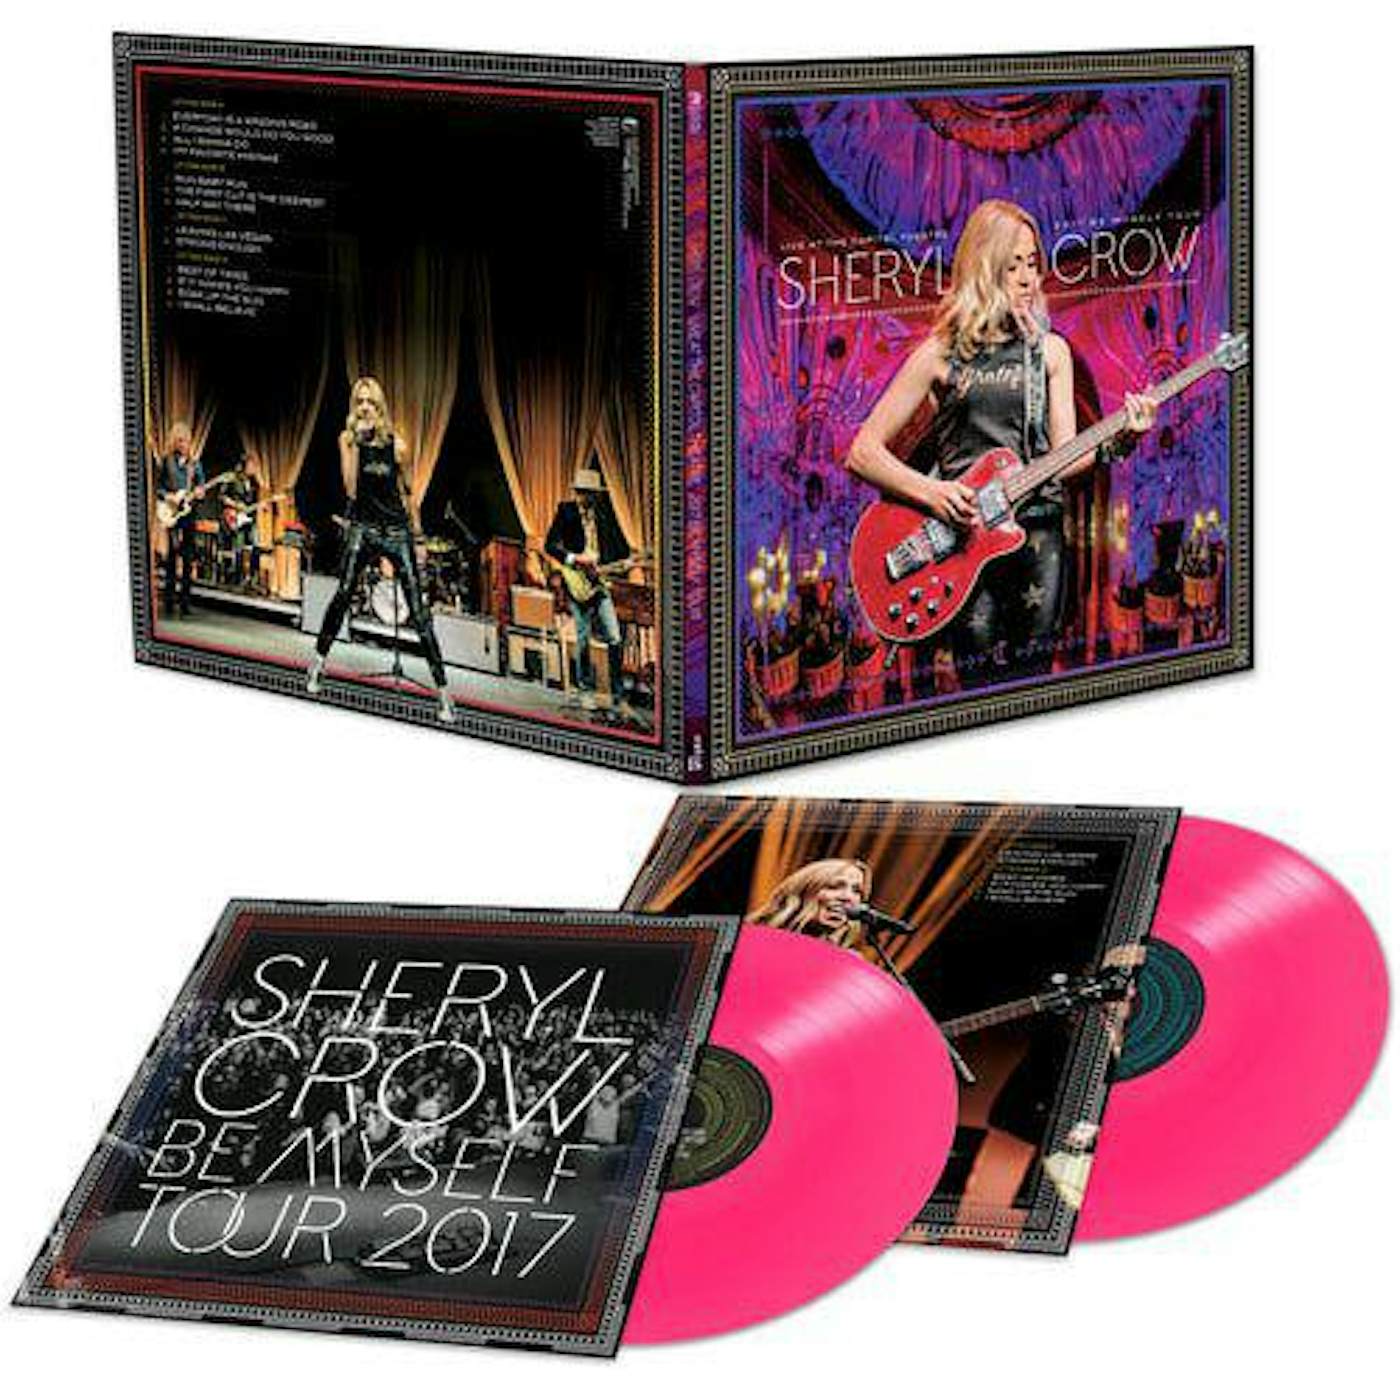 Sheryl Crow Live At The Capitol Theatre - 2017 Be Myself Tour (2LP/Pink) Vinyl Record